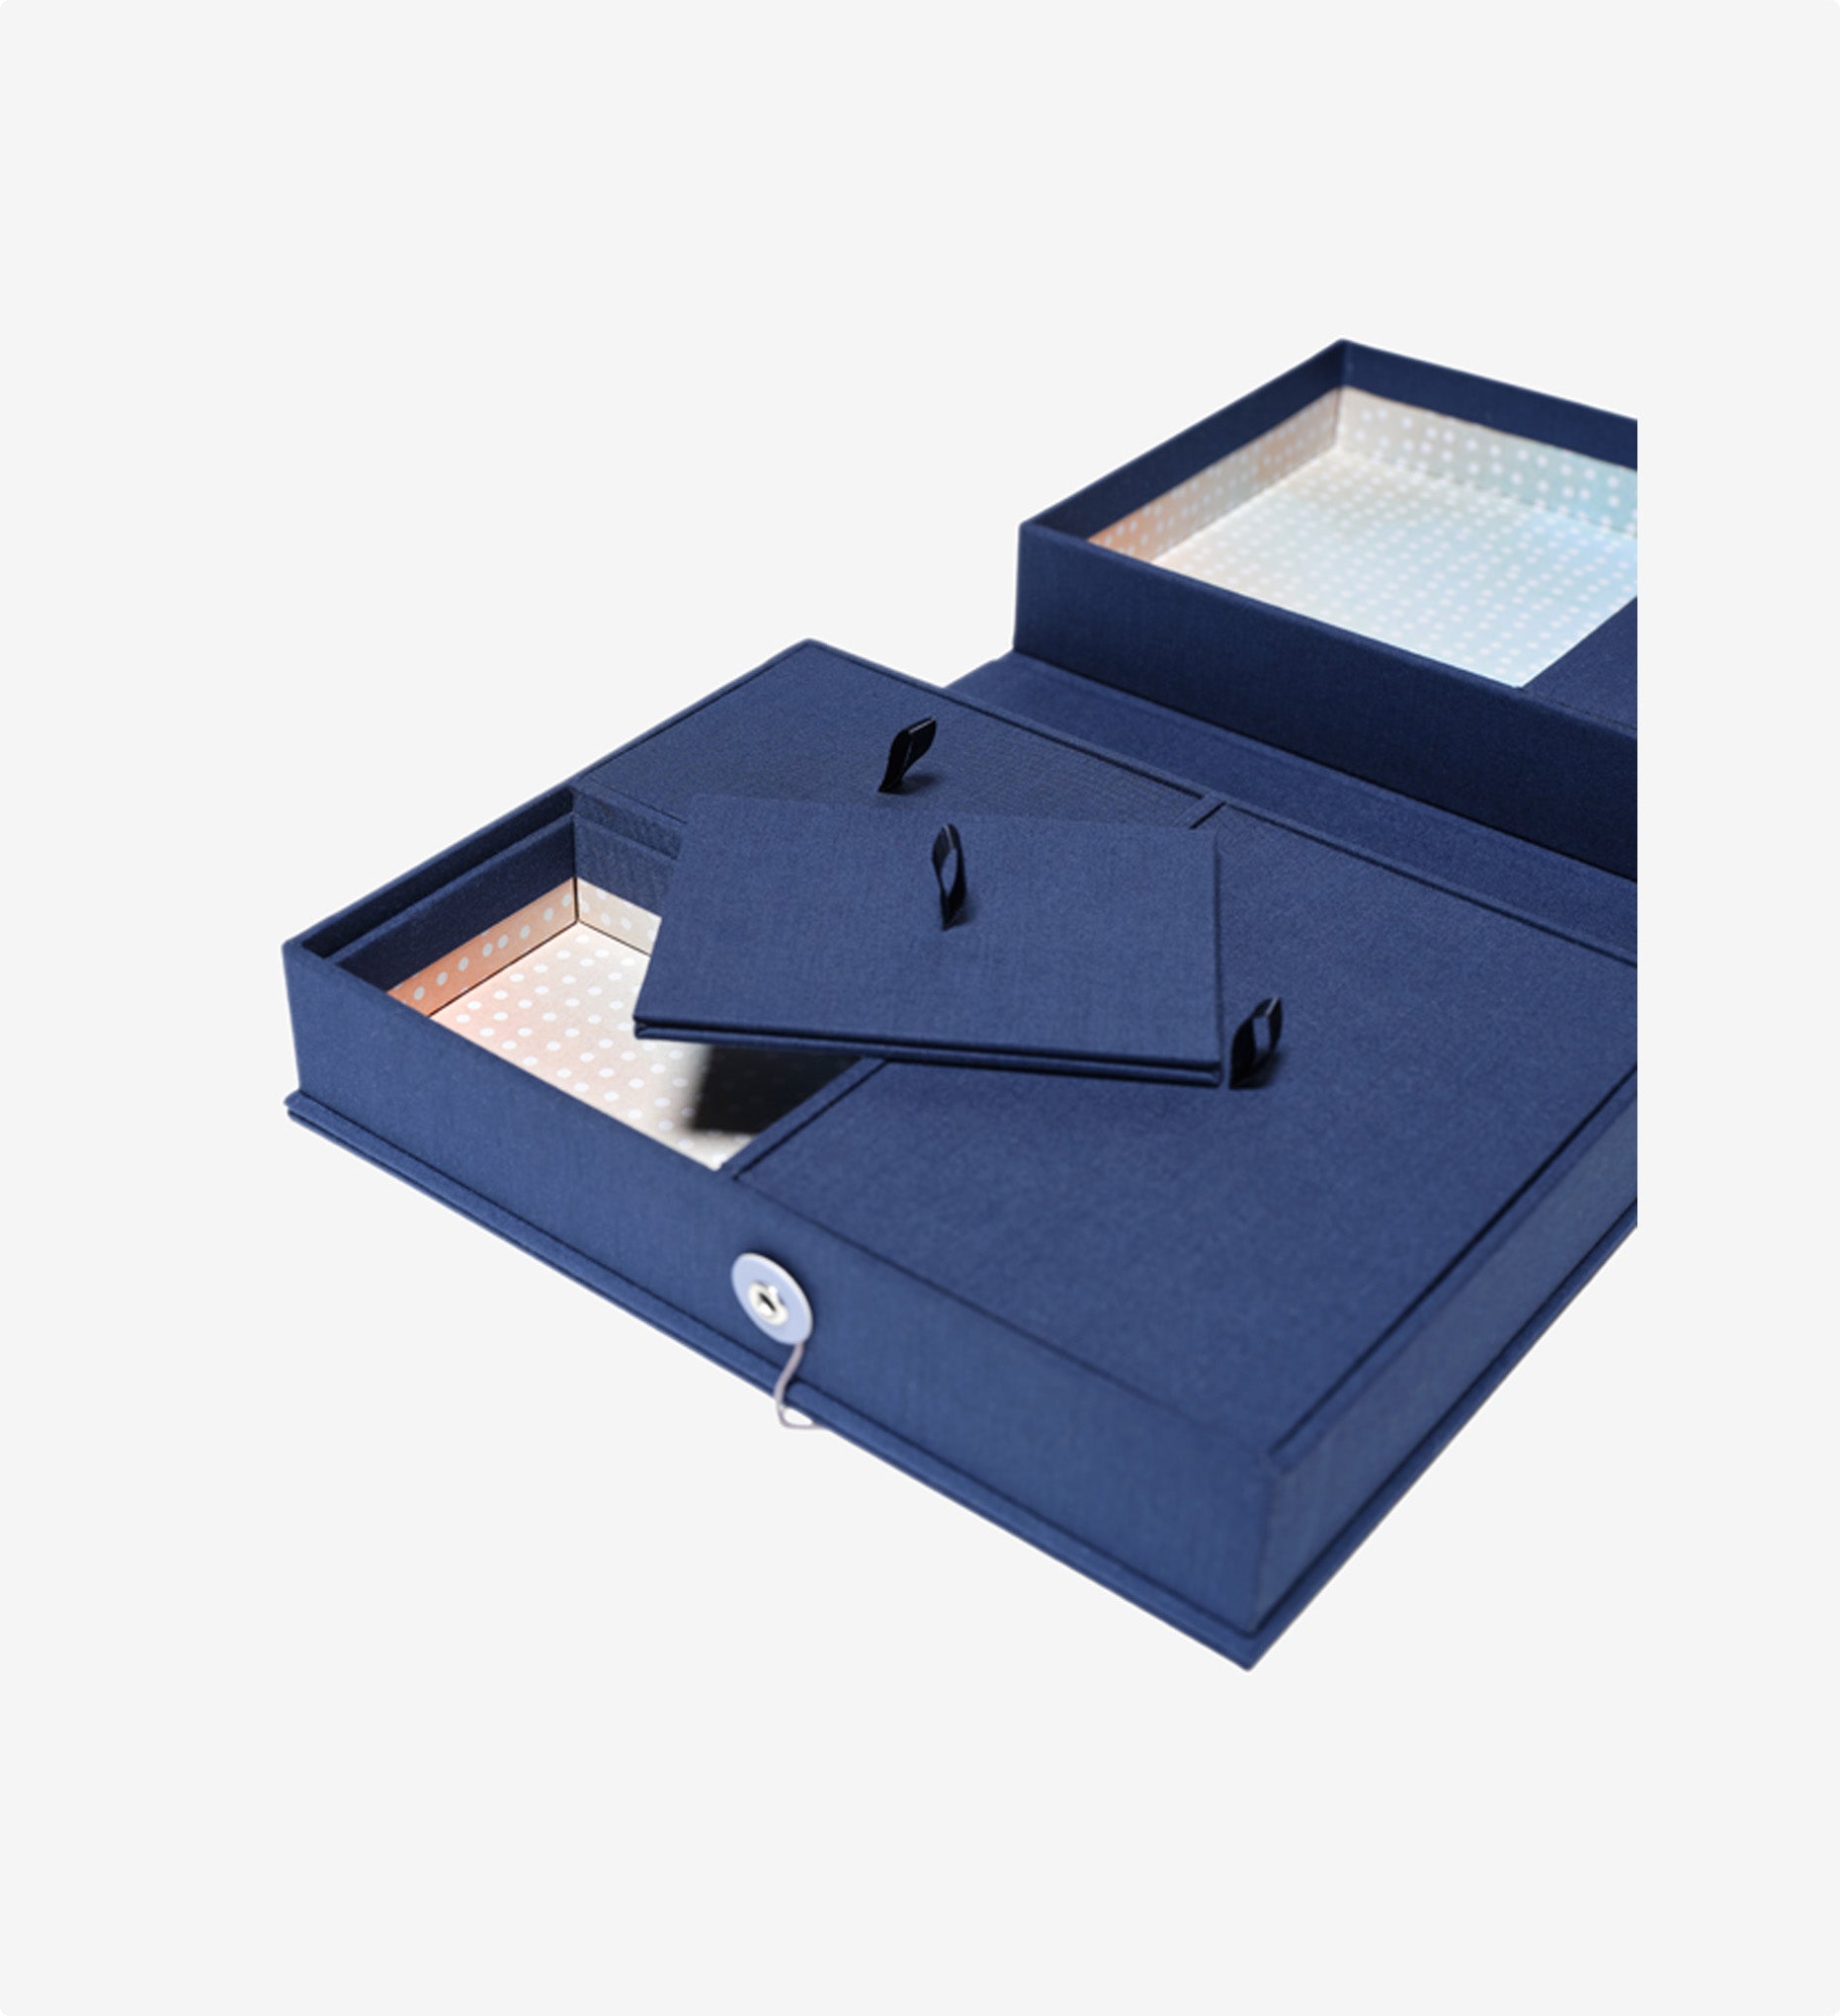 Savor Something blue story box with colorful interior